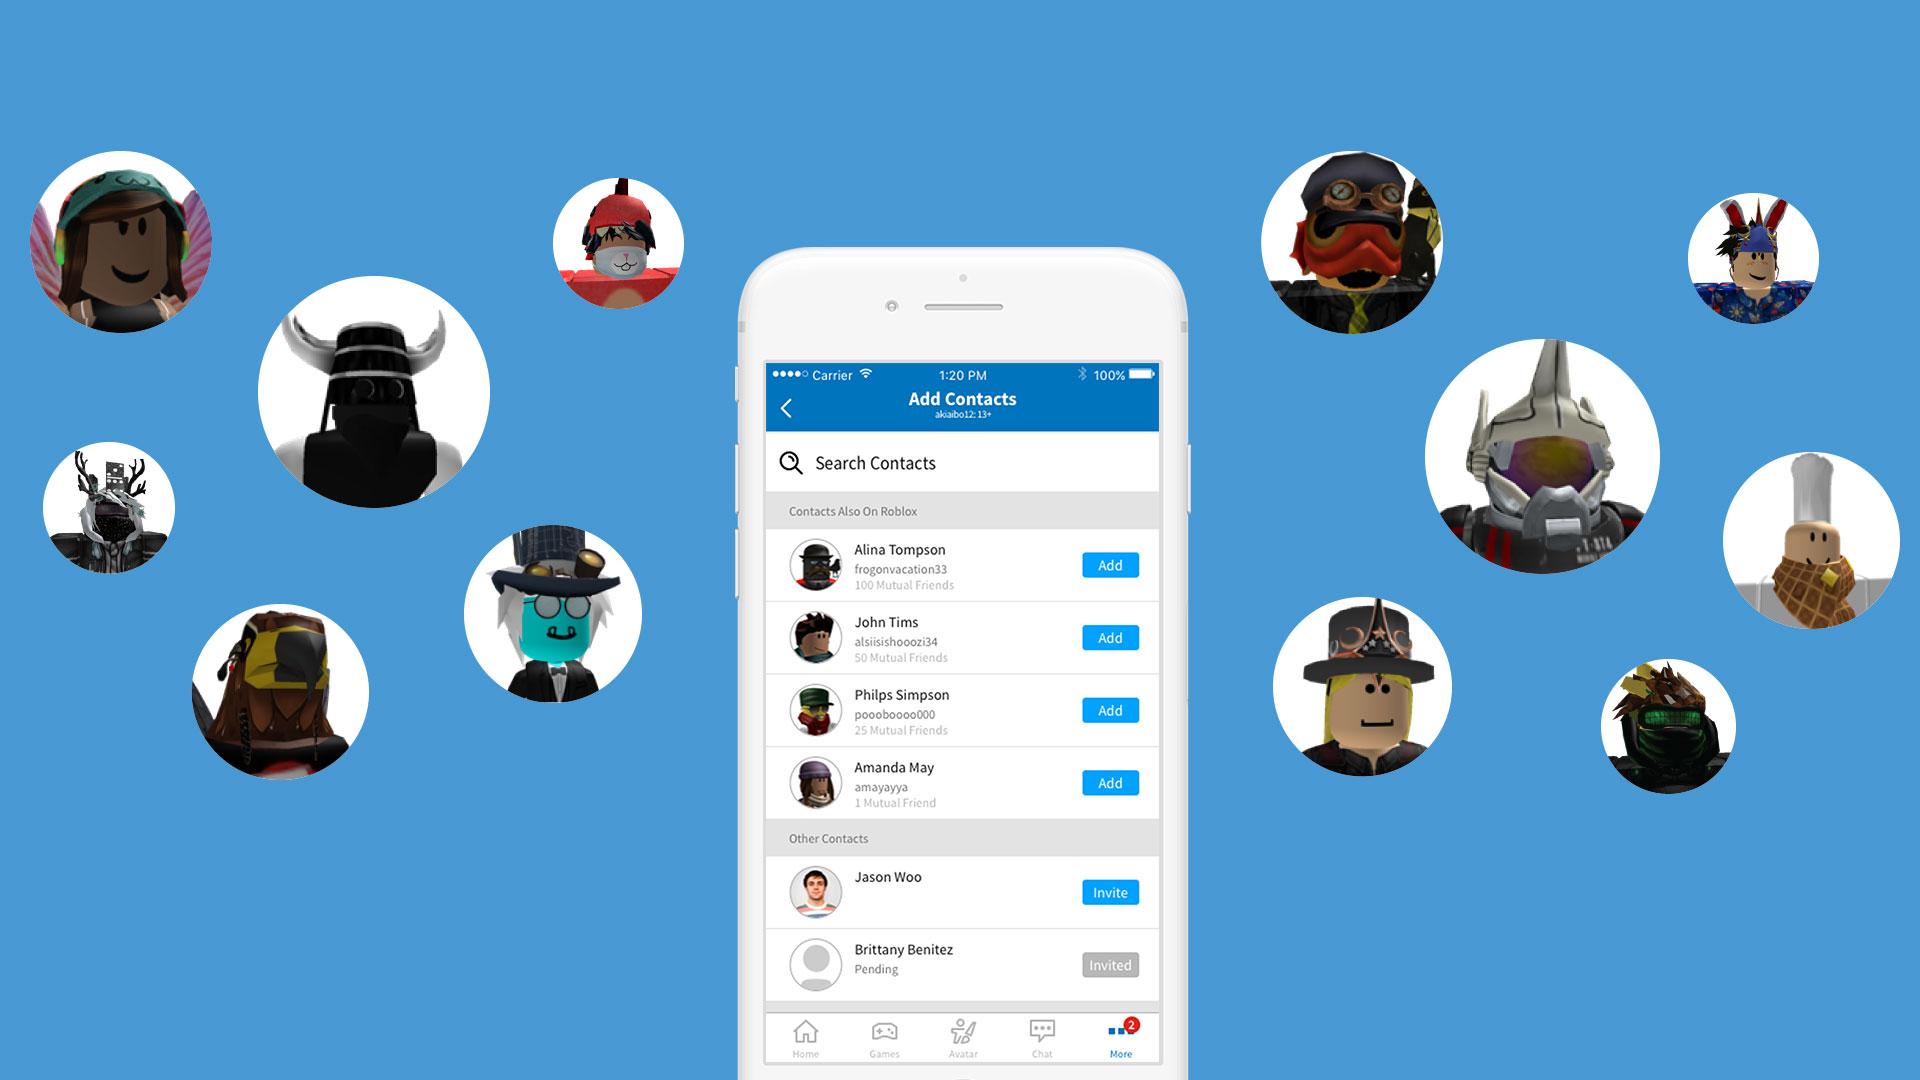 Roblox will let 13+ users import contacts and add recommended friends